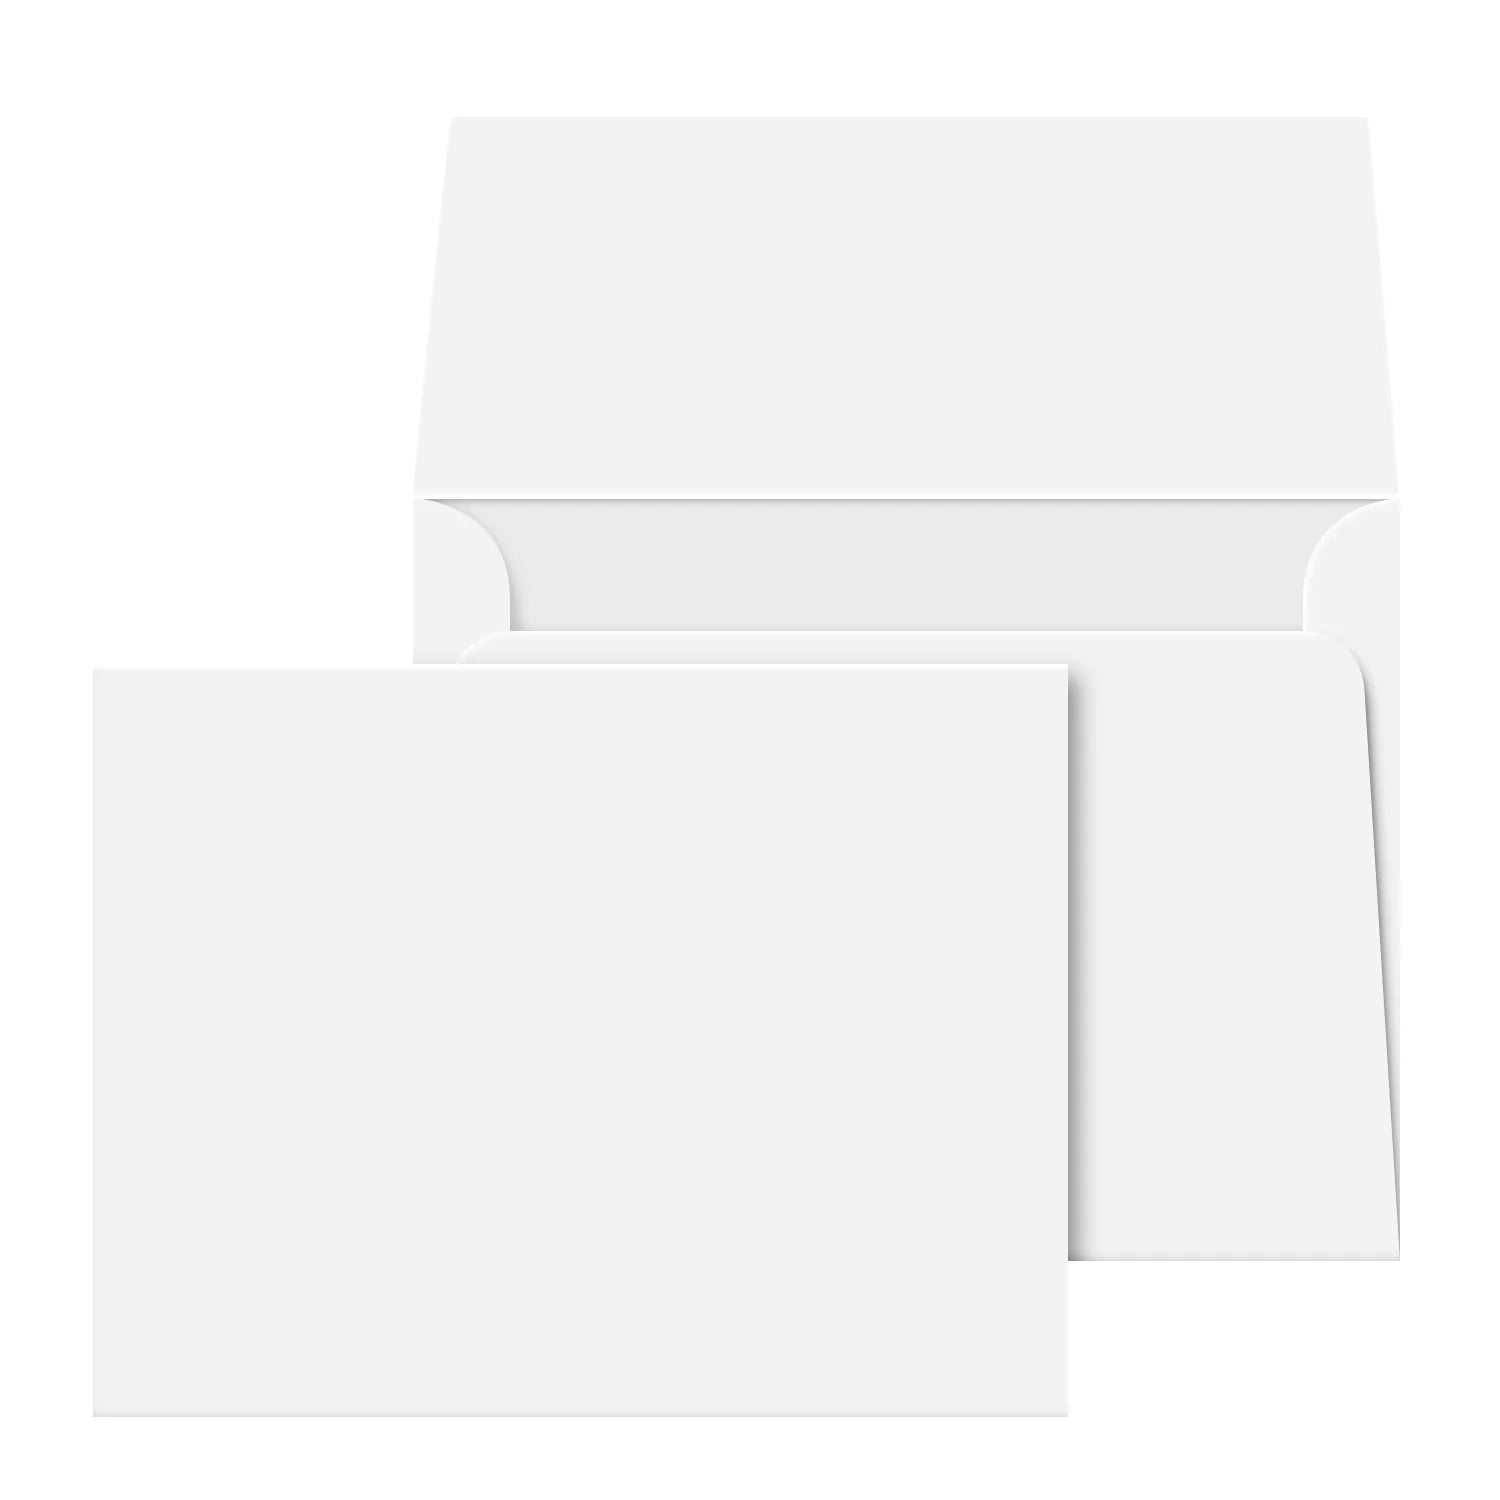 Ultra Thick 5 x 7 Cardstock - 100lb Cover White - for Invitations, Postcards